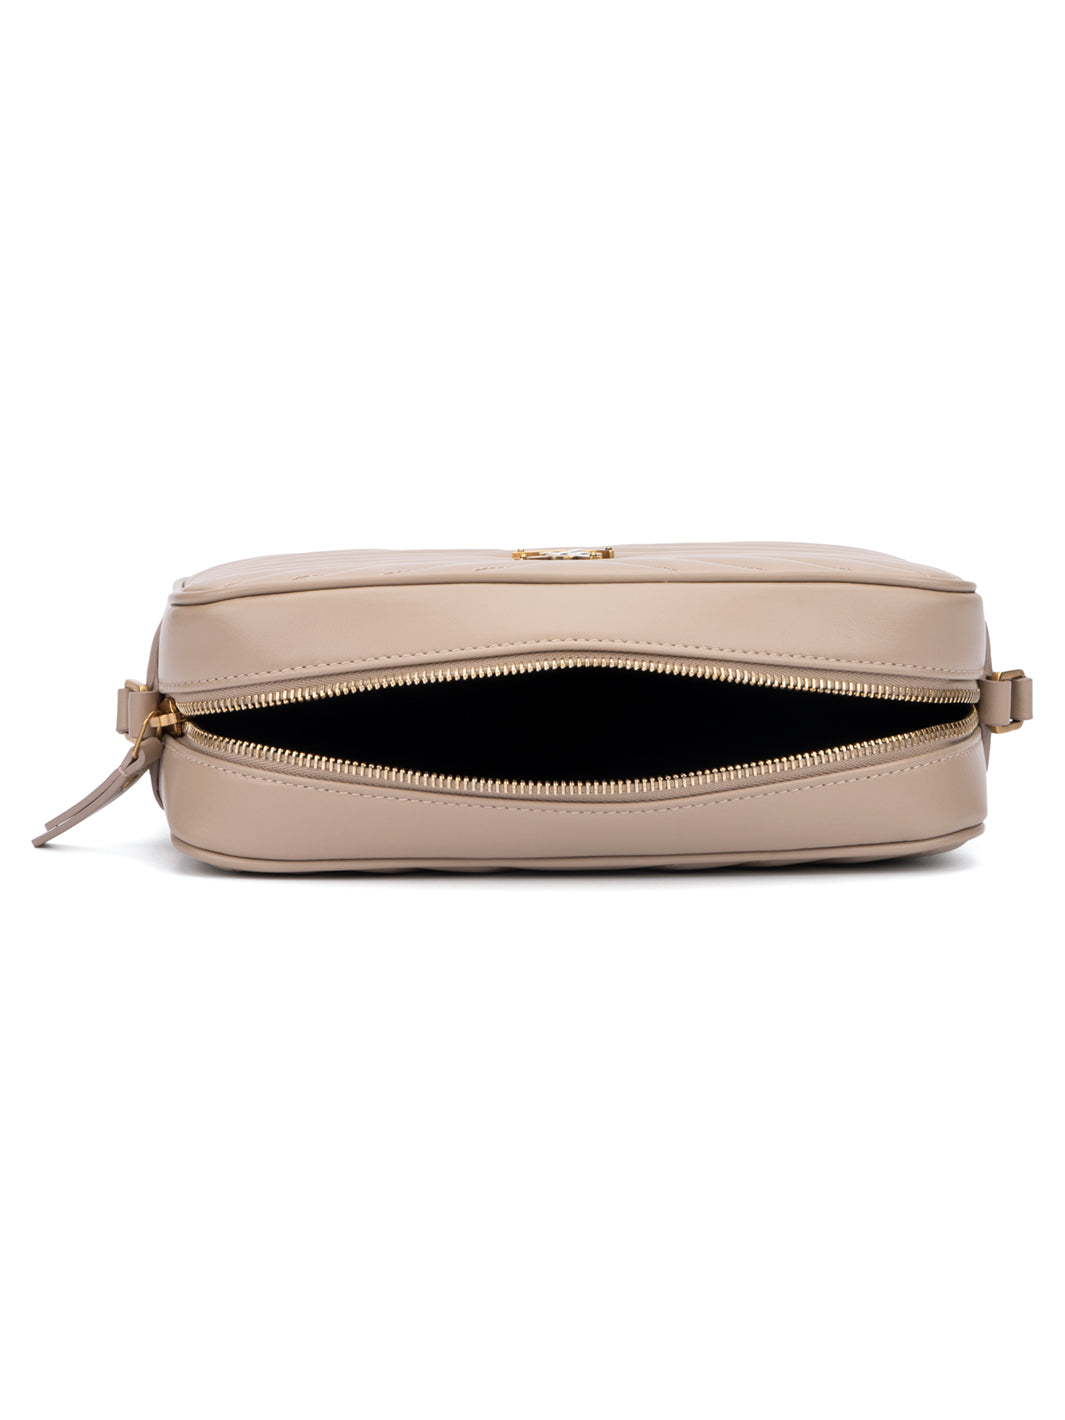 Up to 20% Off Lord & Taylor YSL Bags Sale 